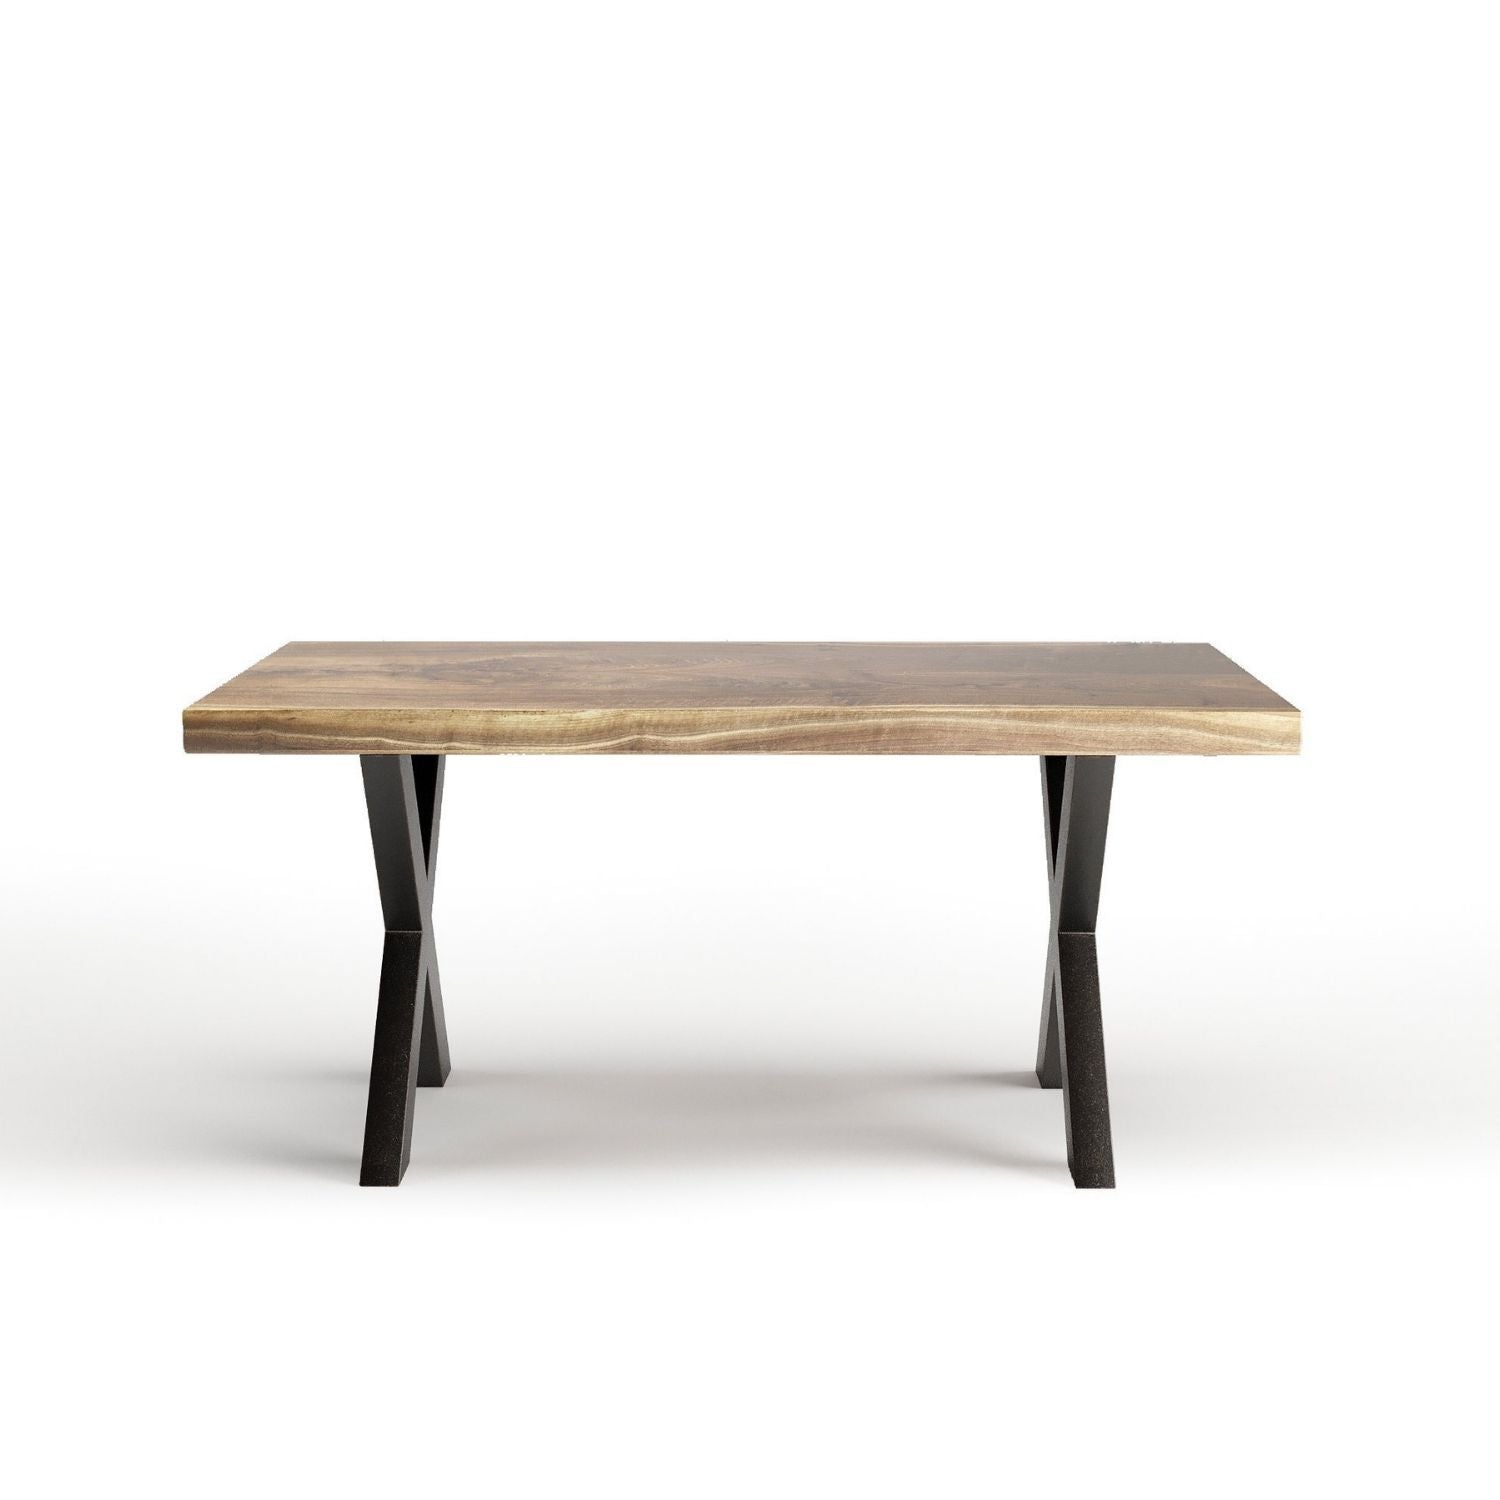 Bali Wood Dining Table